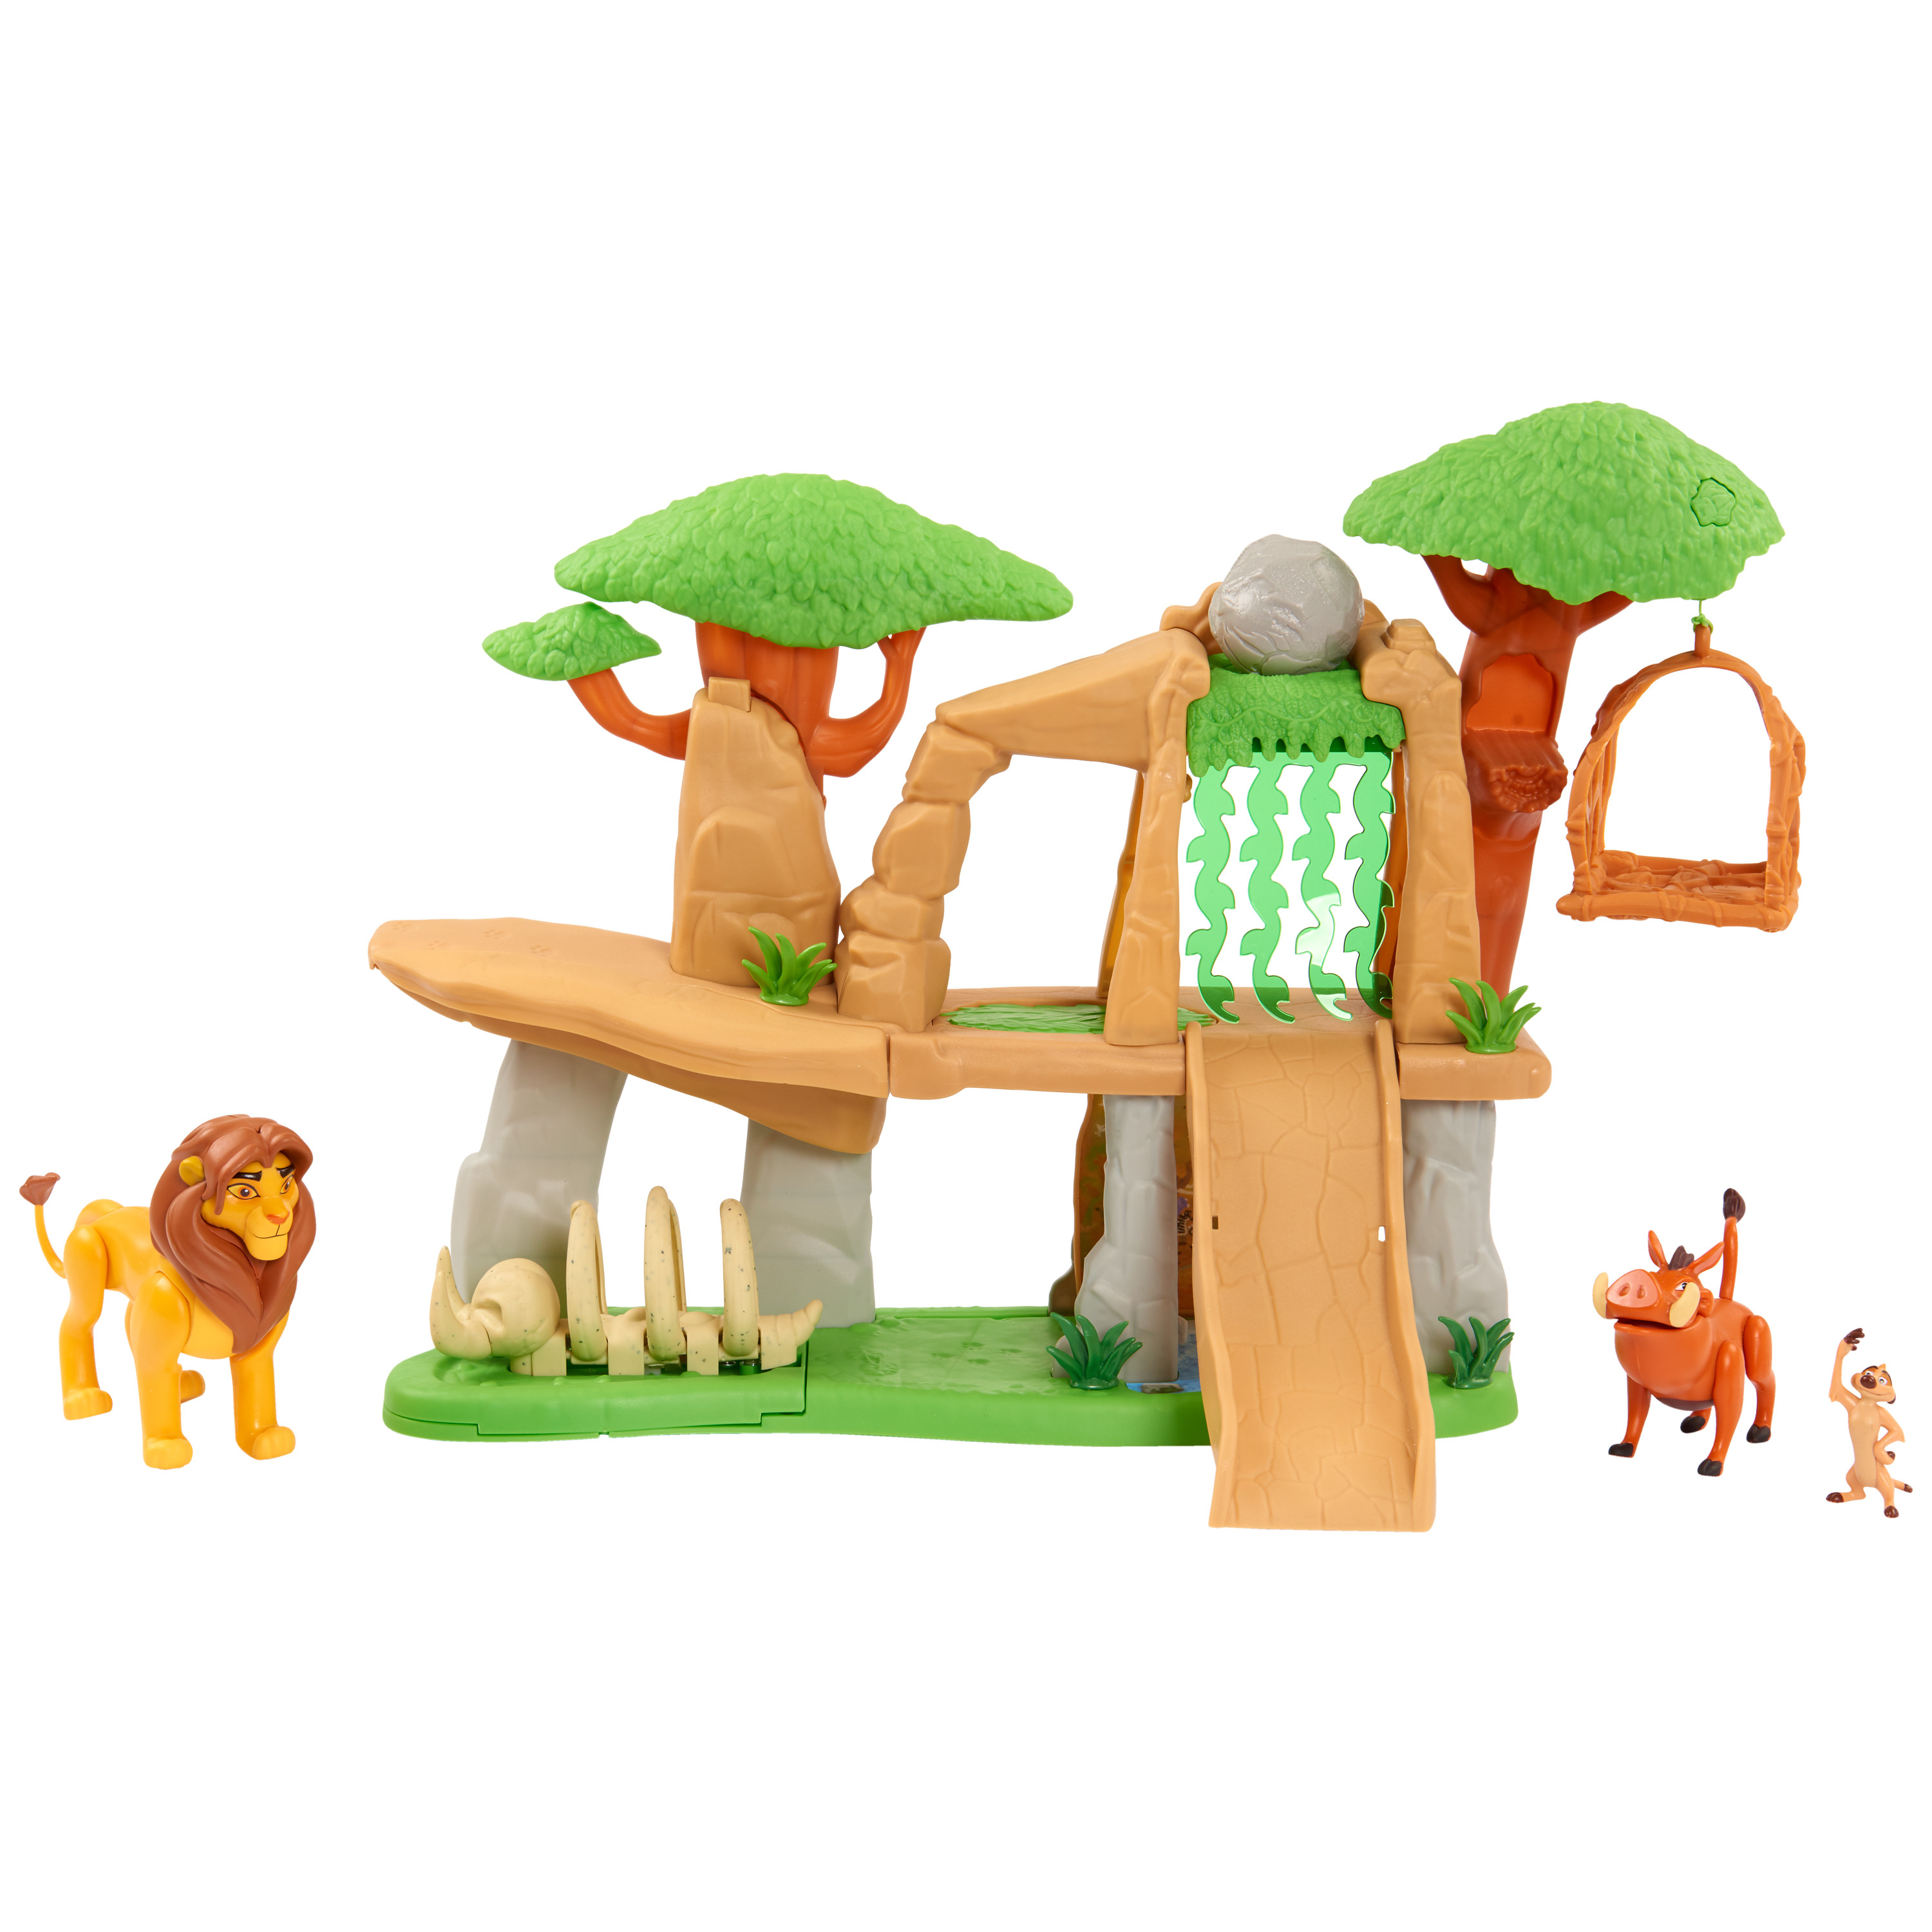 Disney the Lion King Pride Land Playset, Officially Licensed Kids Toys for Ages 3 Up, Gifts and Presents - image 1 of 3